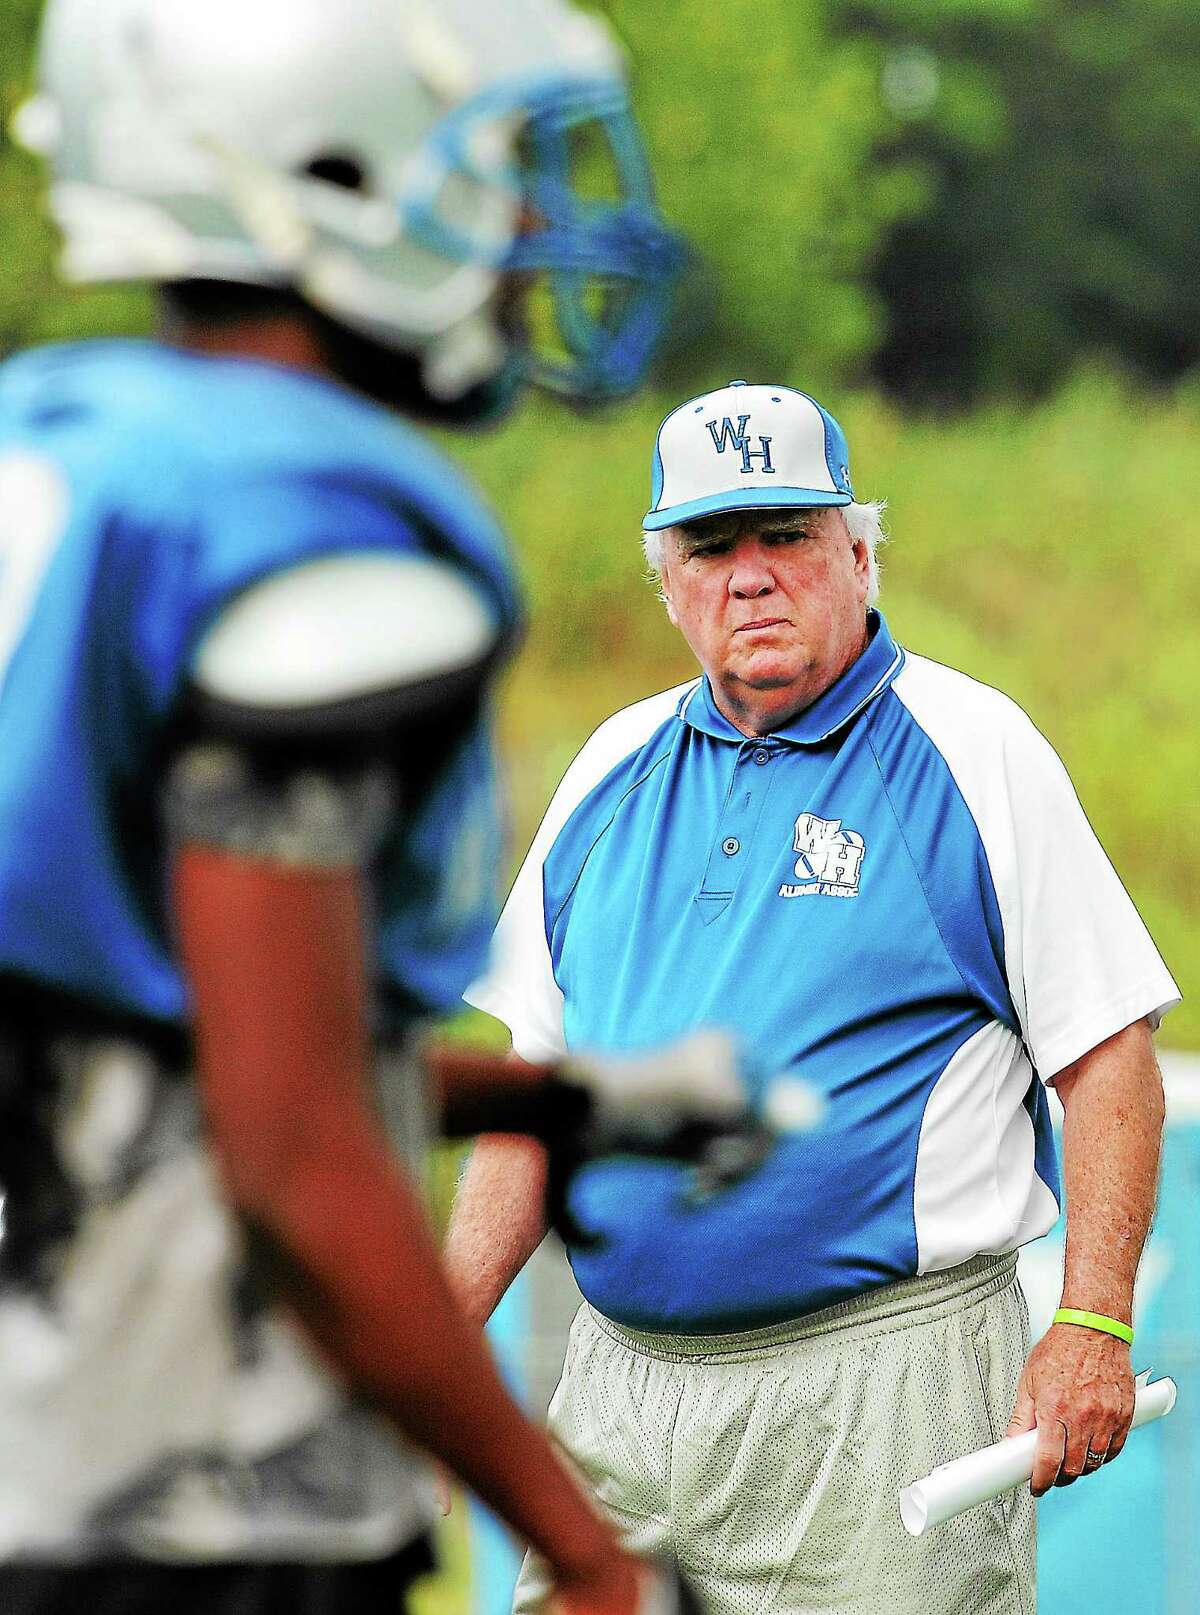 West Haven football coach Ed McCarthy announced this week that this will be his final season on the sidelines.